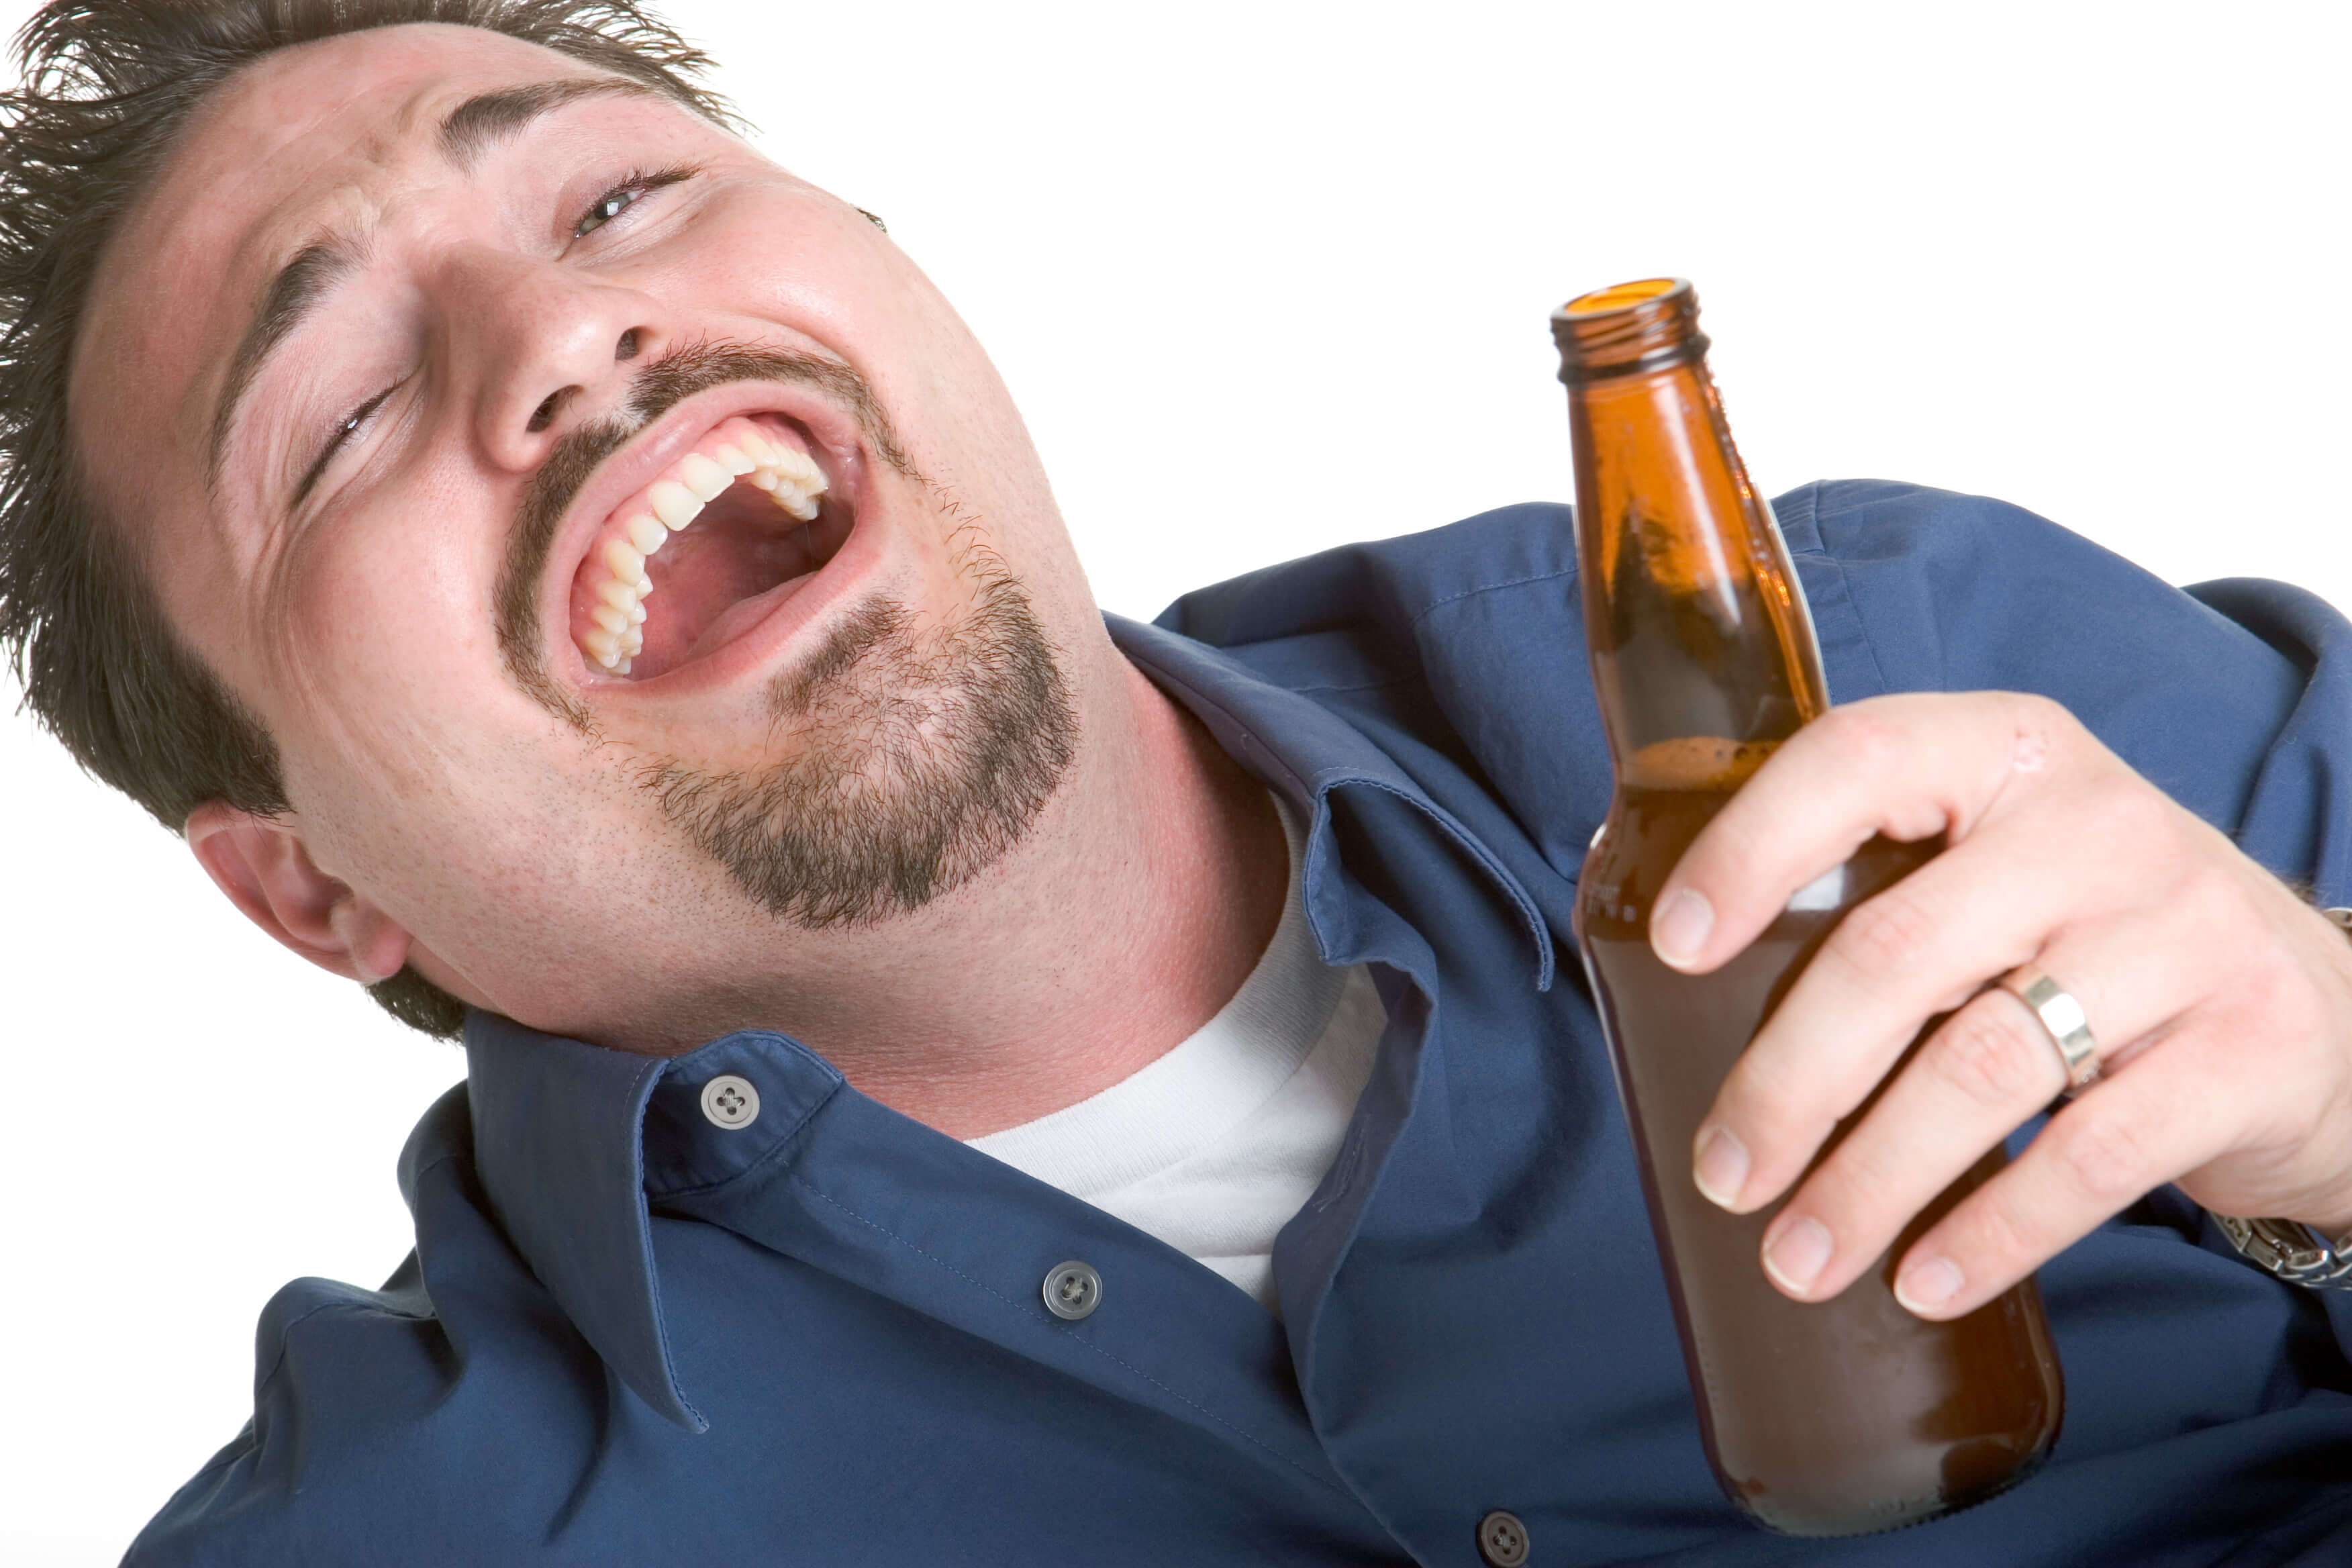 The human liver can produce alcohol. How is this possible?